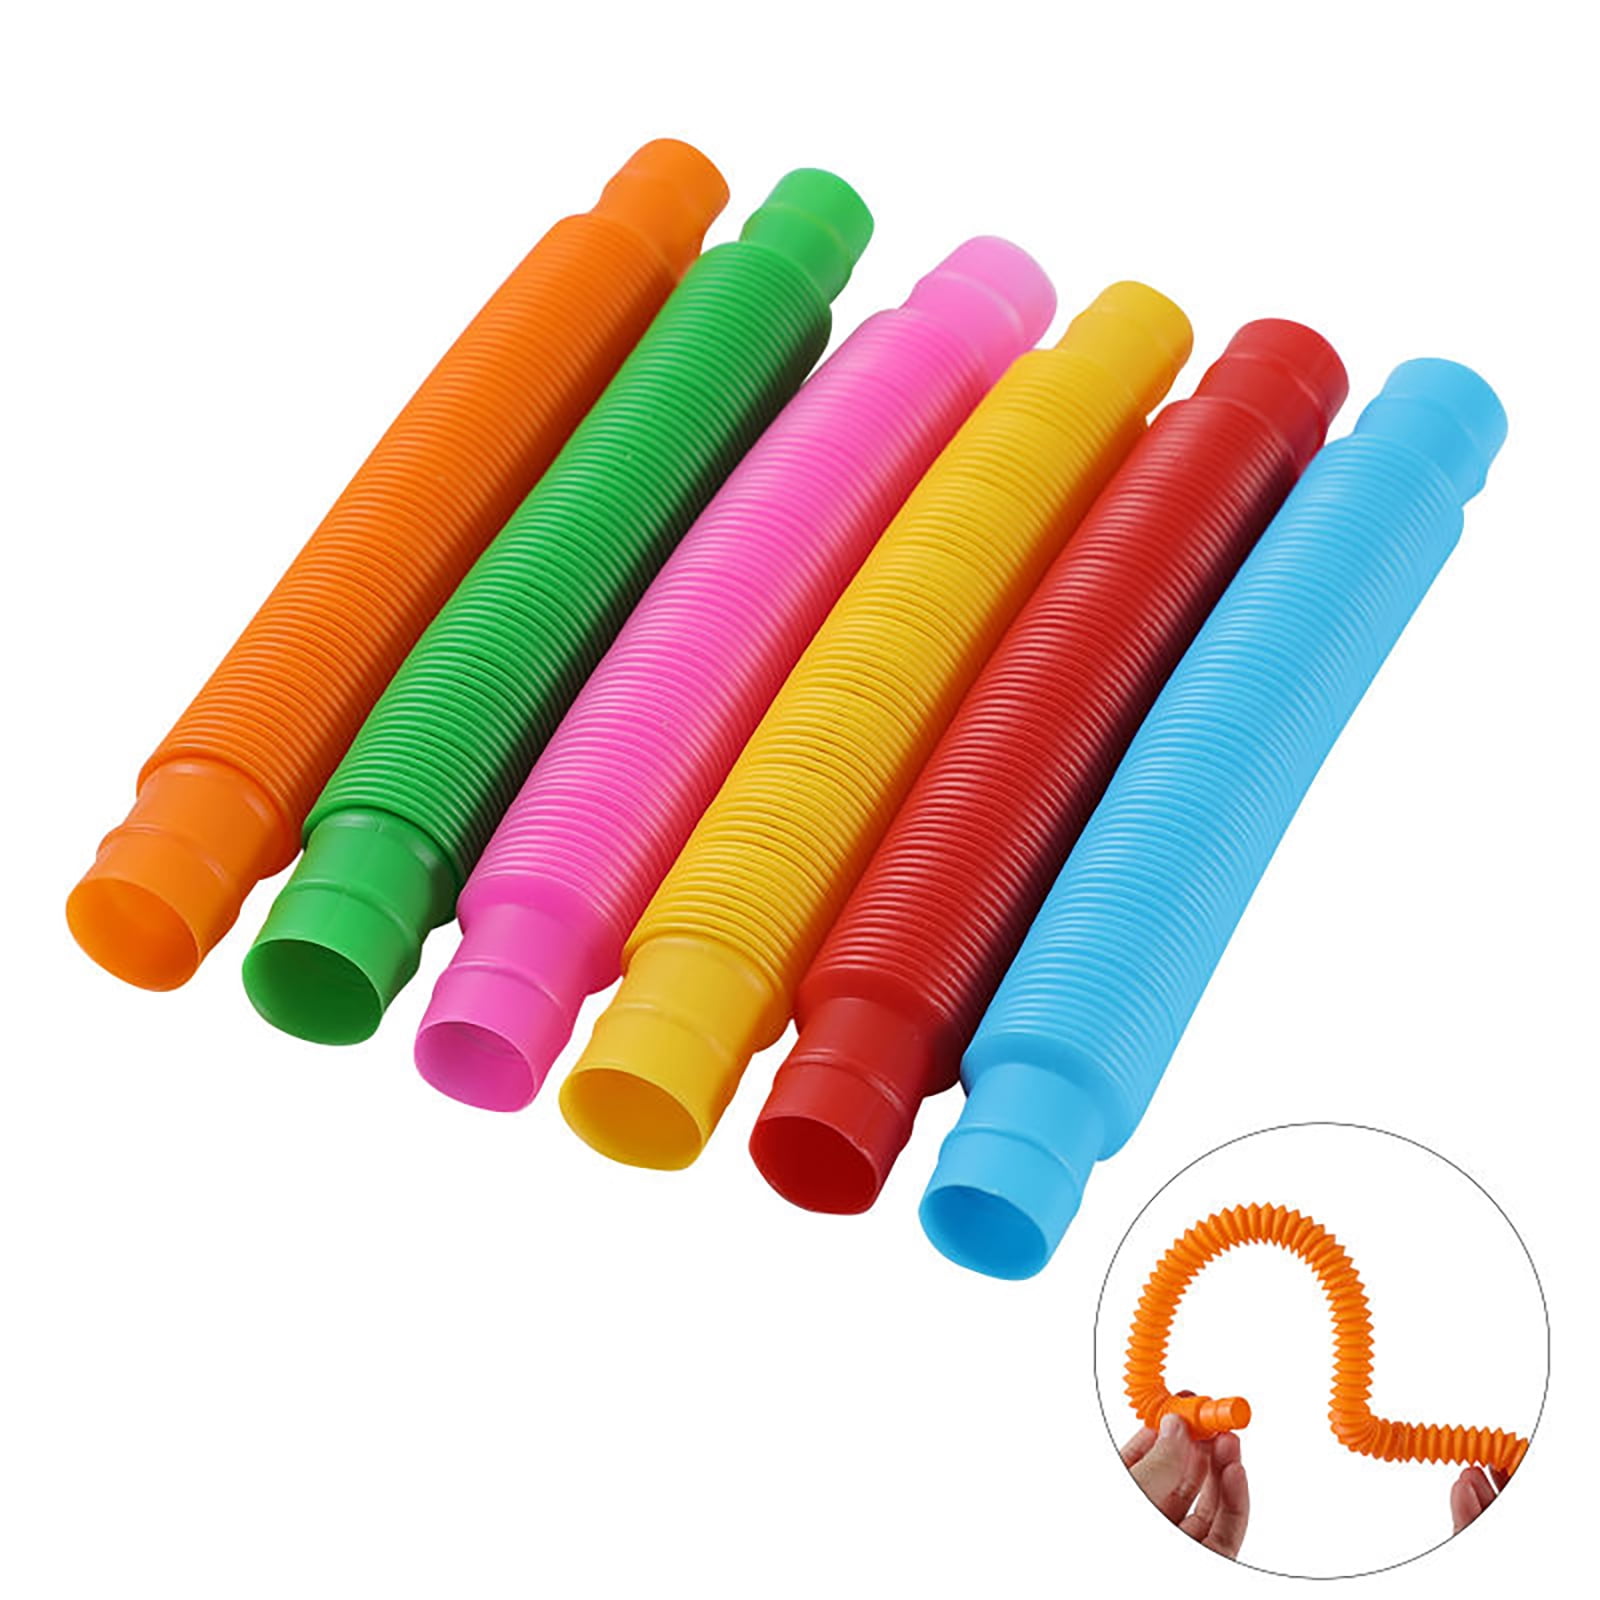 Details about   6Pcs Fidget Pop Tube Toys Sensory Stretch Pipe Tools Decompression Stress Gifts 